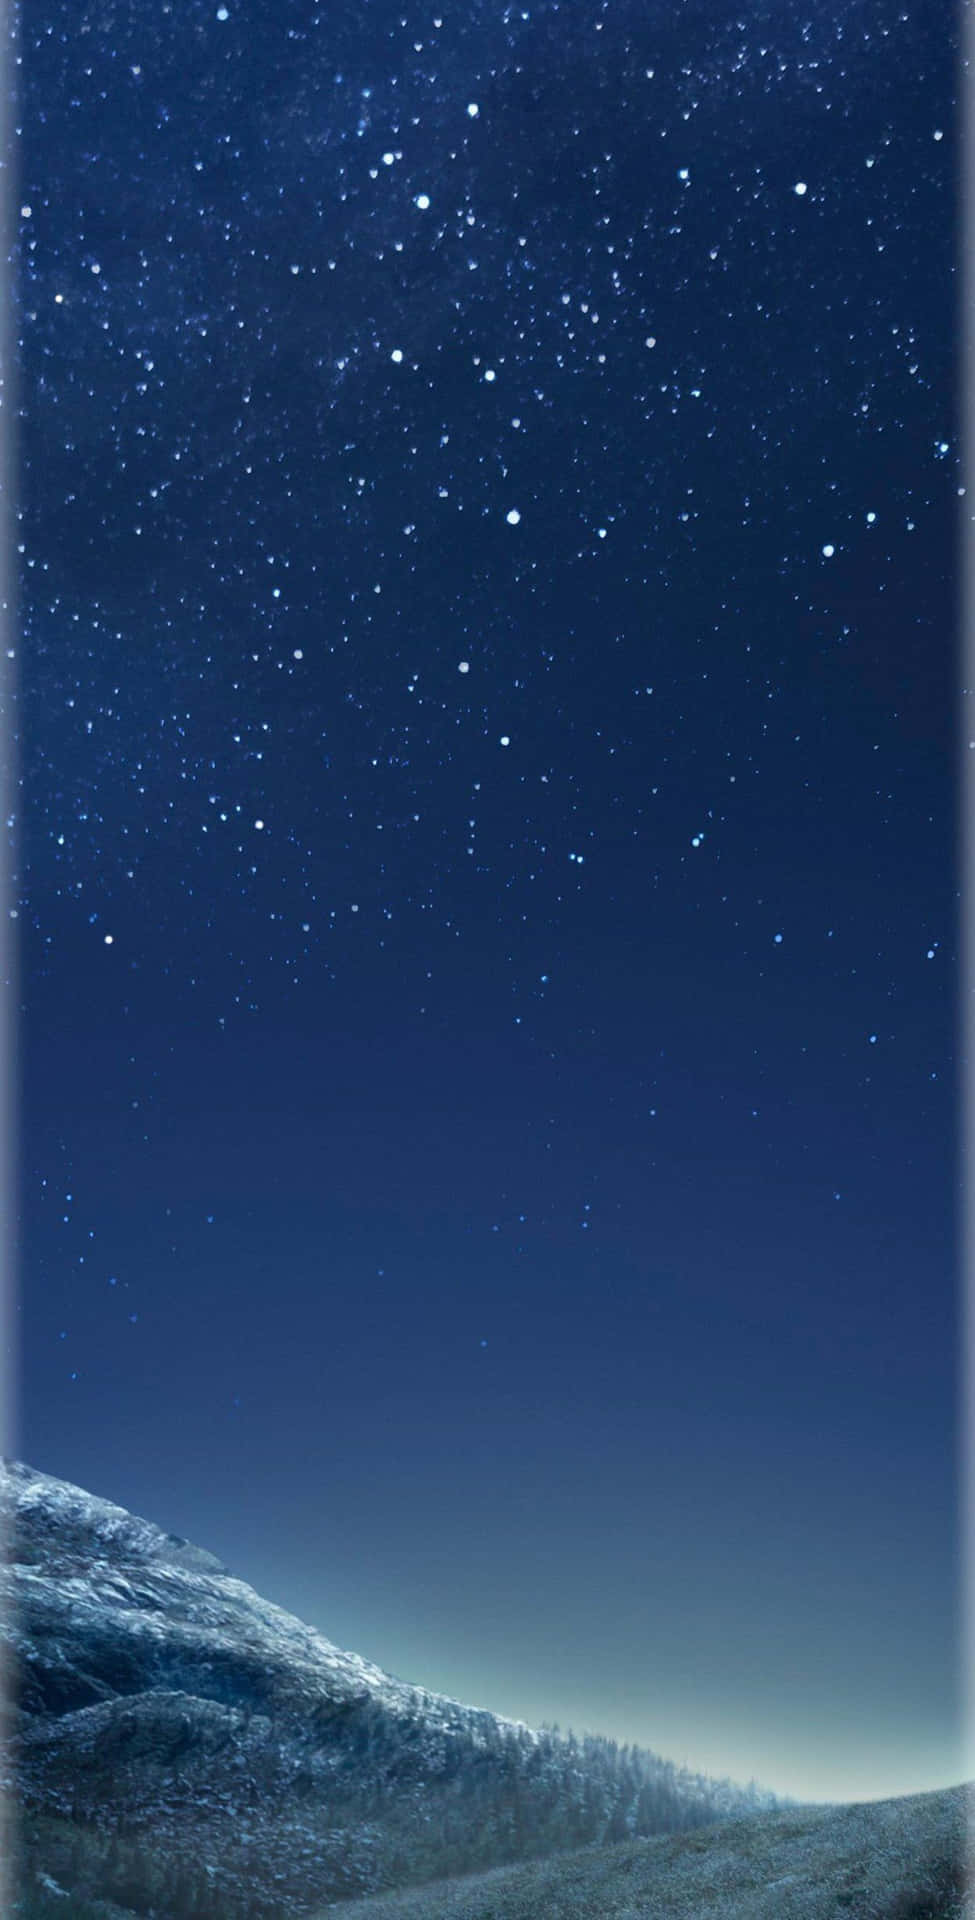 A Night Sky With Stars And A Mountain Wallpaper